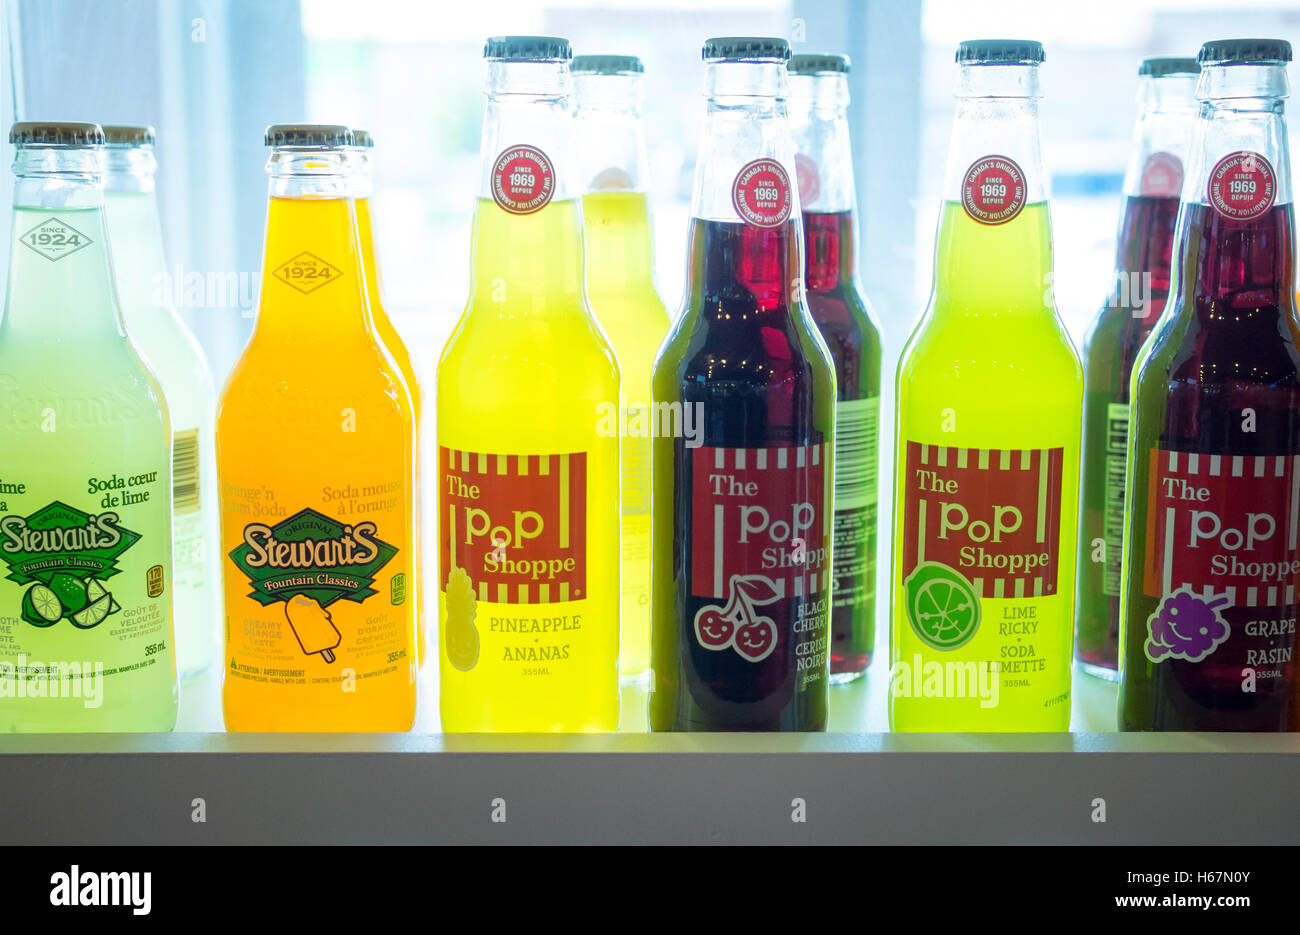 Multiple varieties of soda manufactured by The Pop Shoppe and Stewart's  Fountain Classics Stock Photo - Alamy